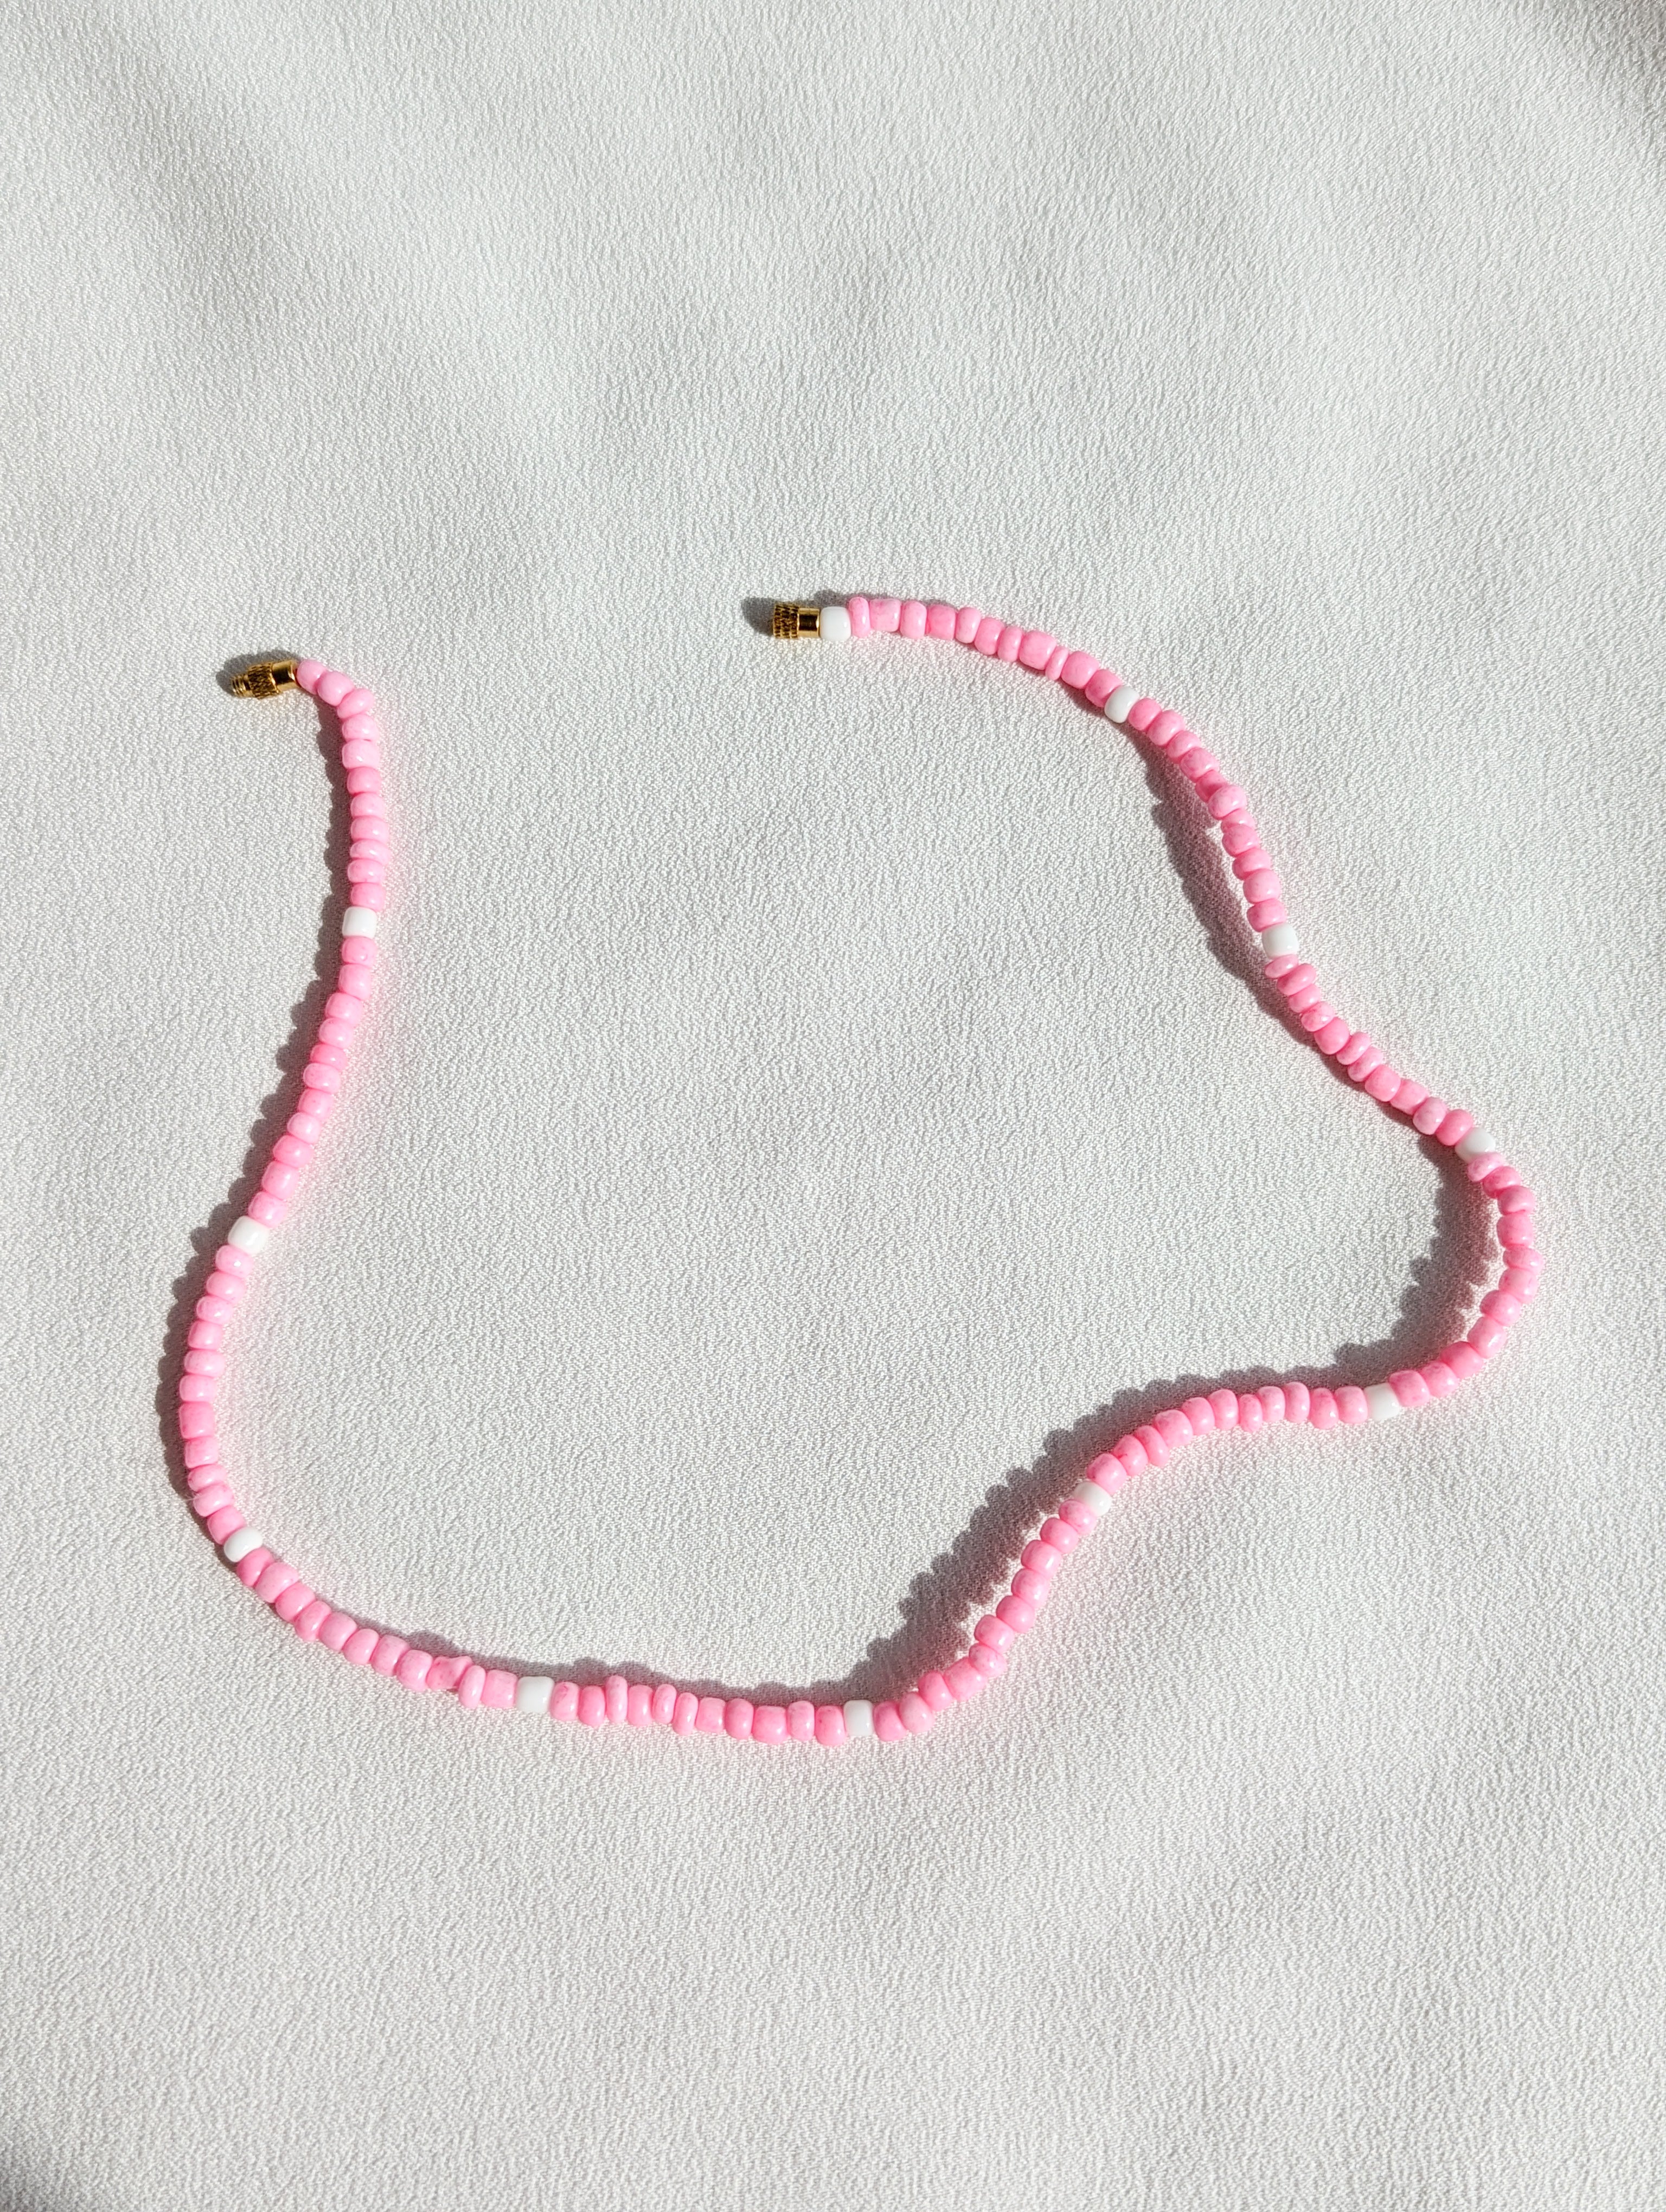 [THE ELEVEN] Necklace: Pink/White [Large Beads]